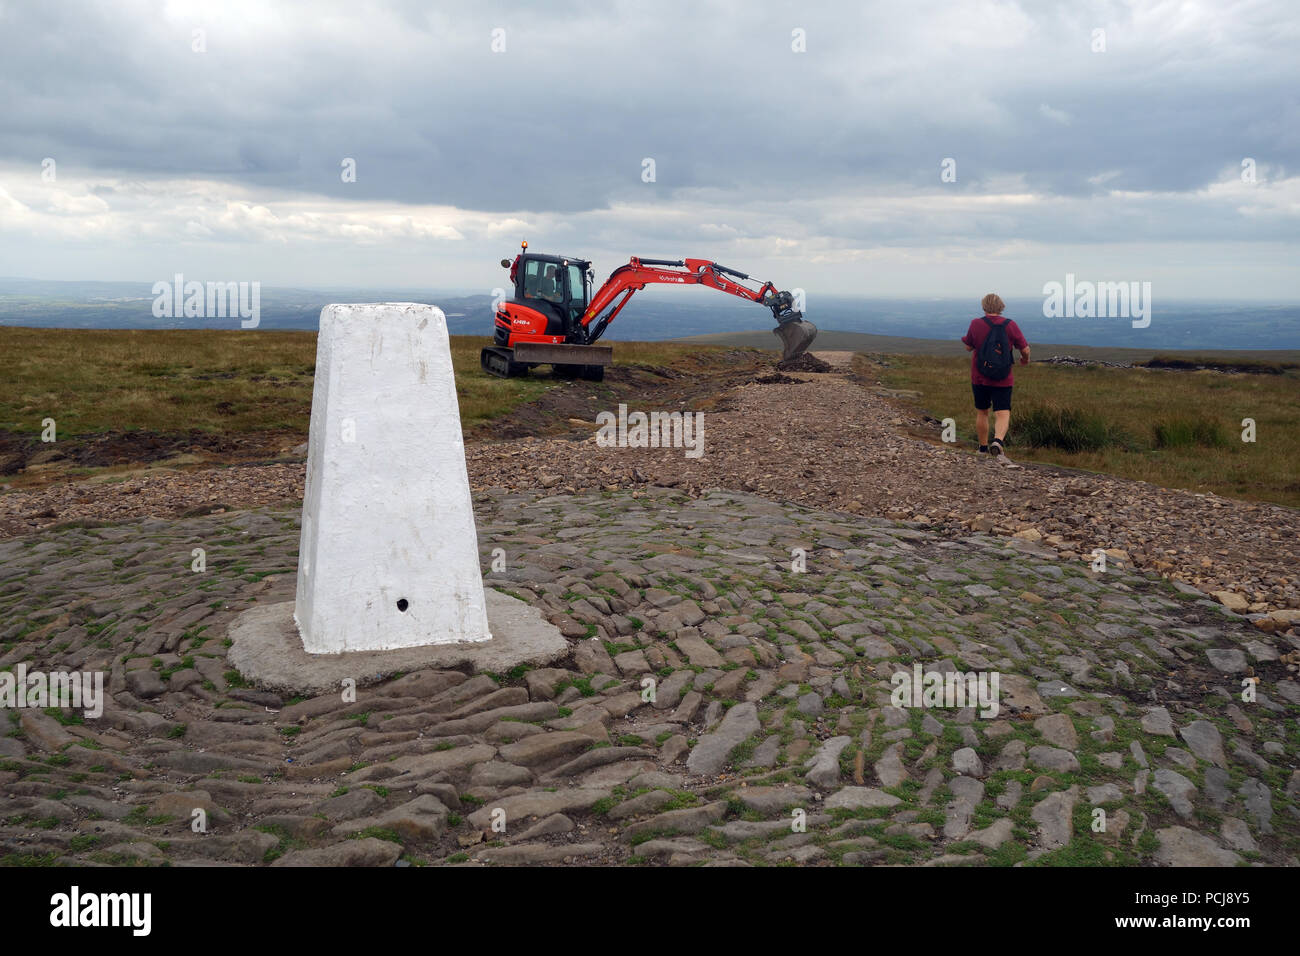 Man Walking near Digger Working on the New Path Being Constructed Leading up to the Trig Column on the Summit of Pendle Hill, Lancashire, England, UK Stock Photo